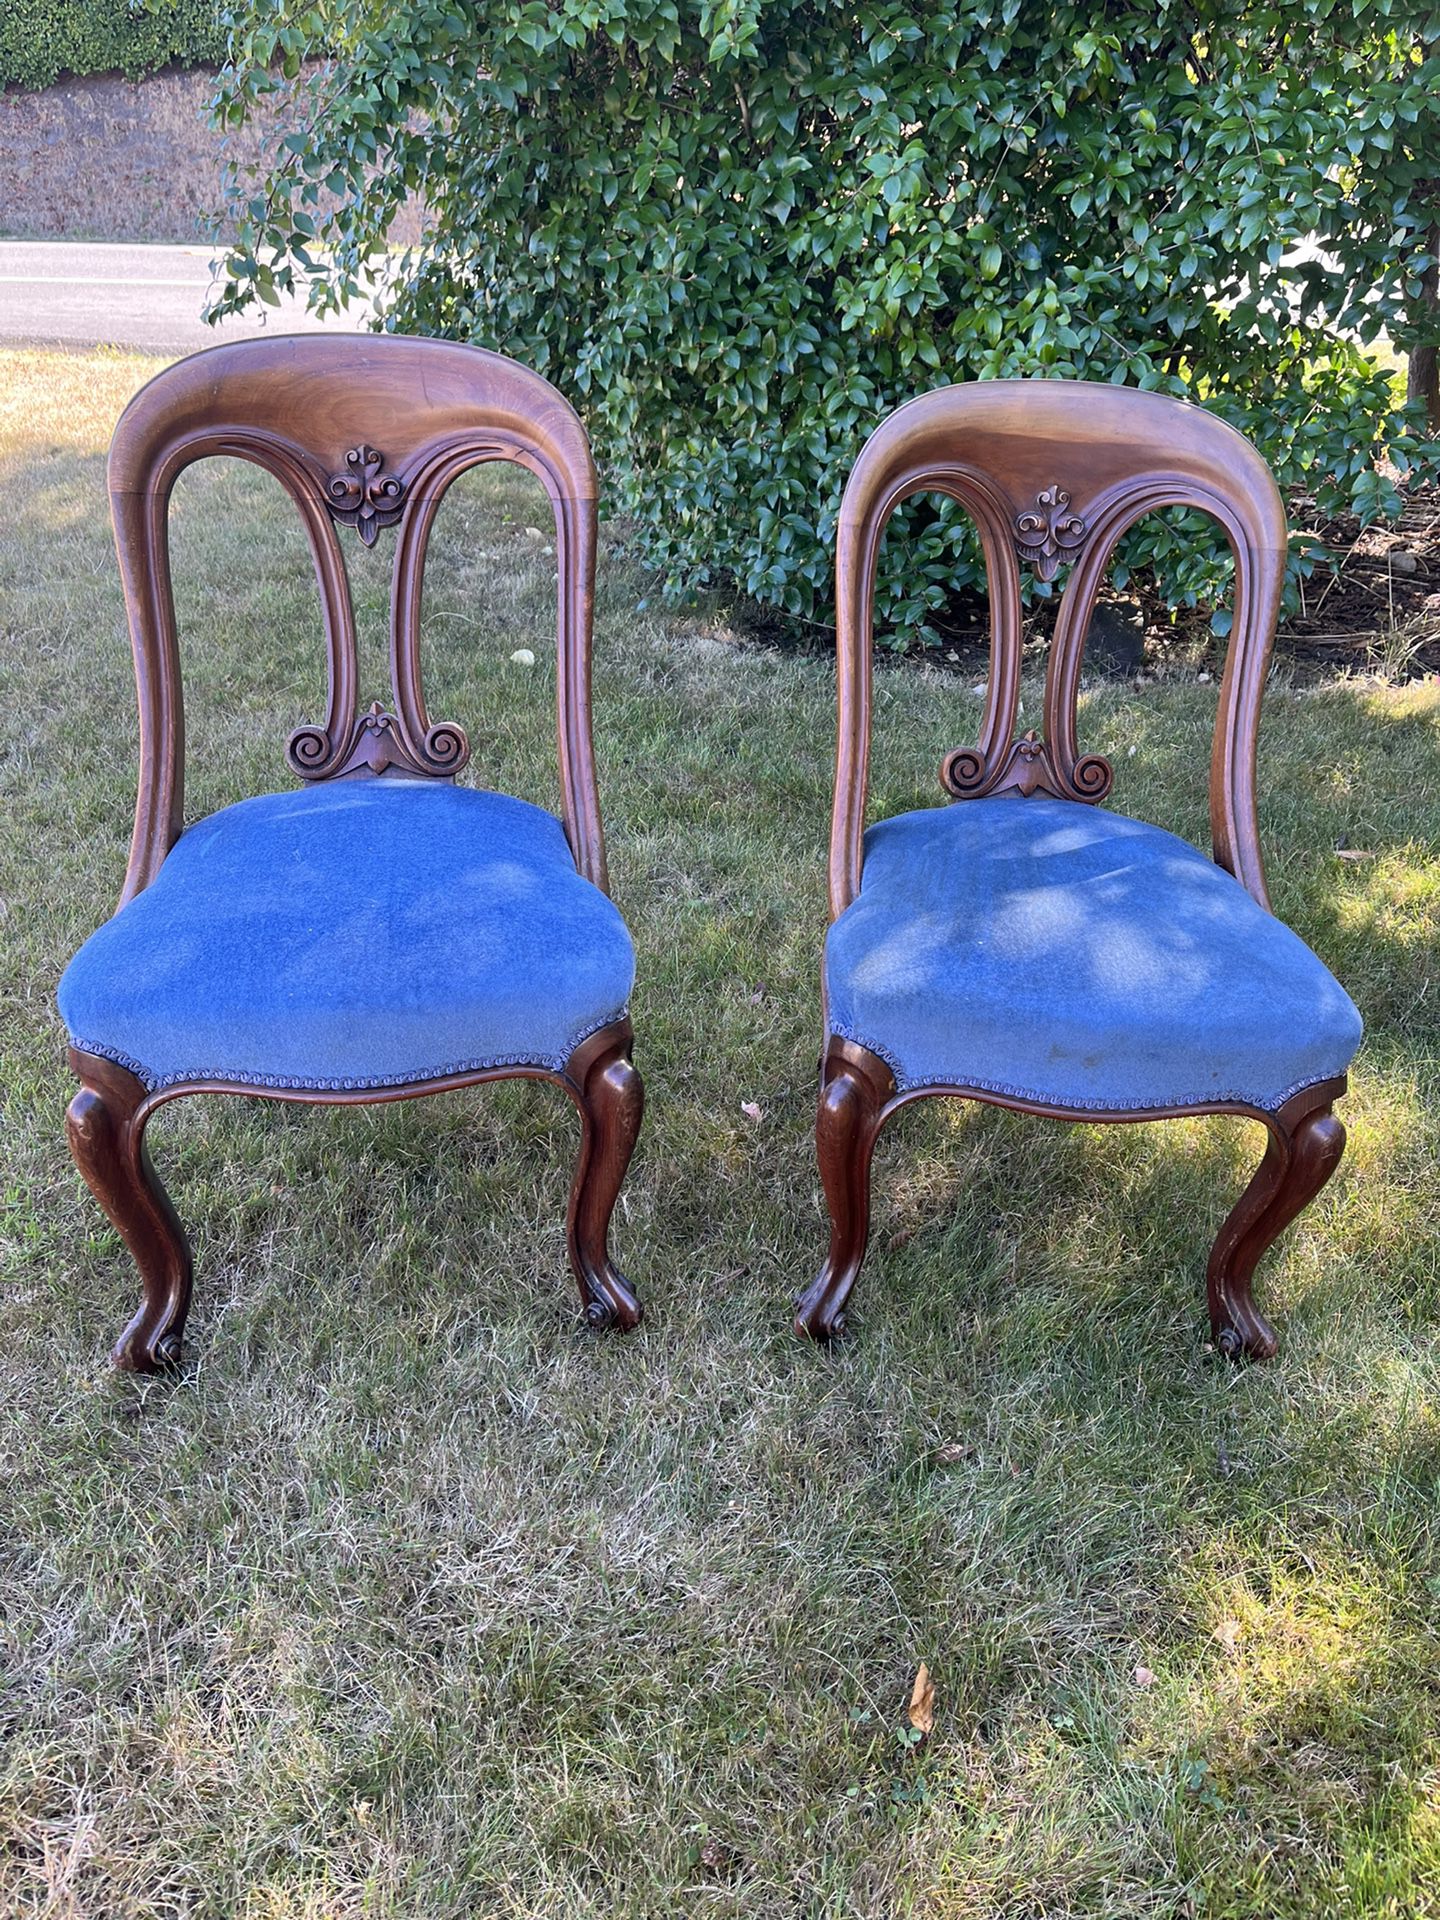 2 Antique Parlor Chairs